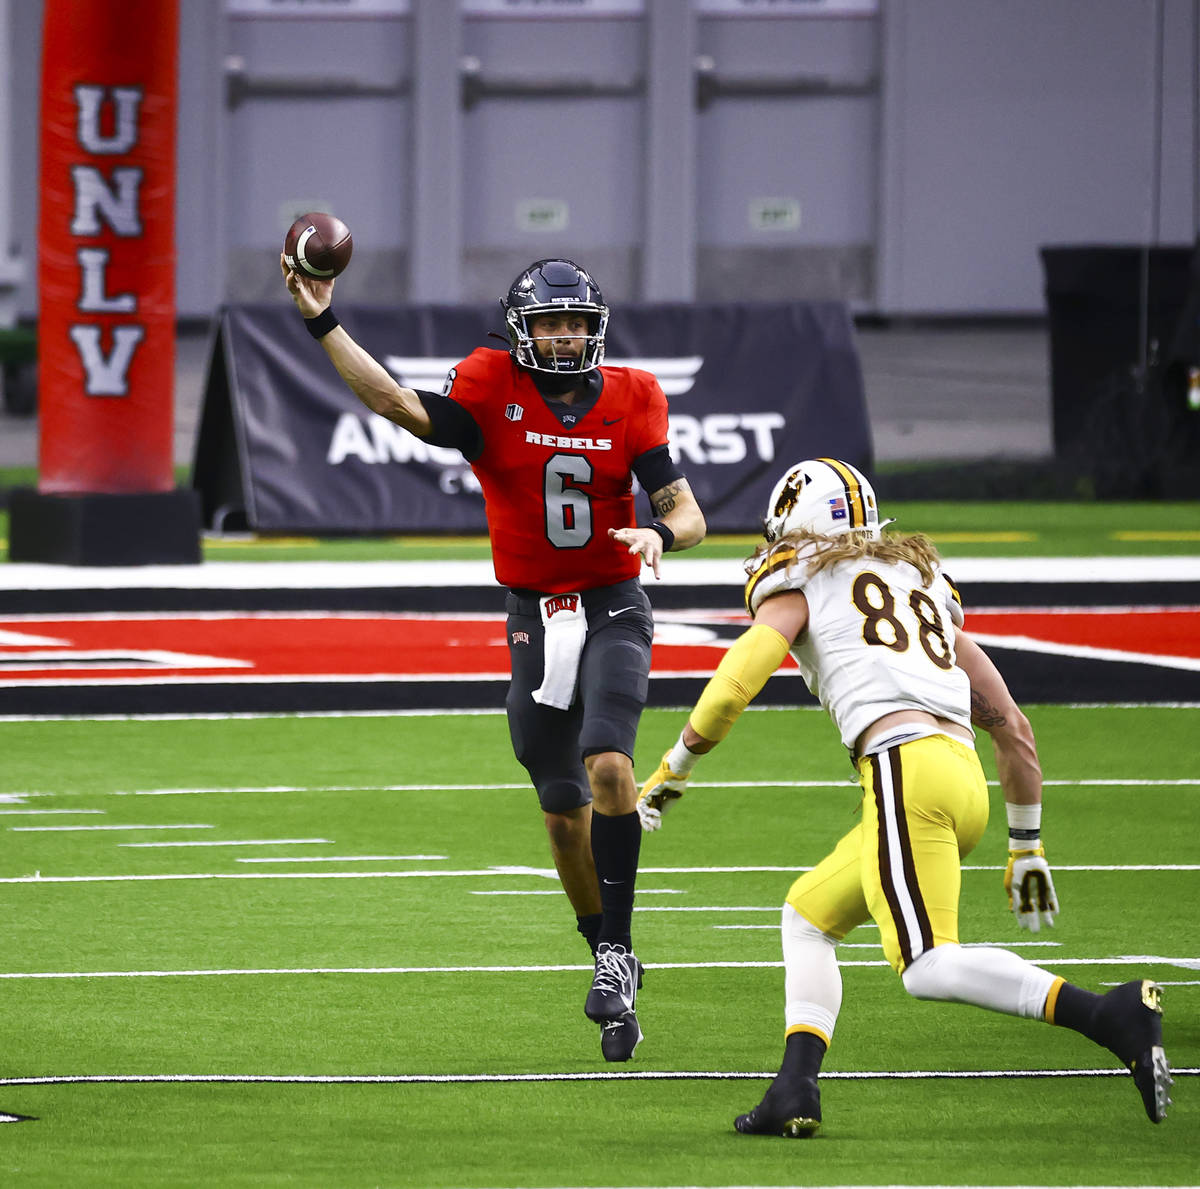 UNLV Rebels quarterback Max Gilliam (6) looks to throw under pressure from Wyoming Cowboys defe ...